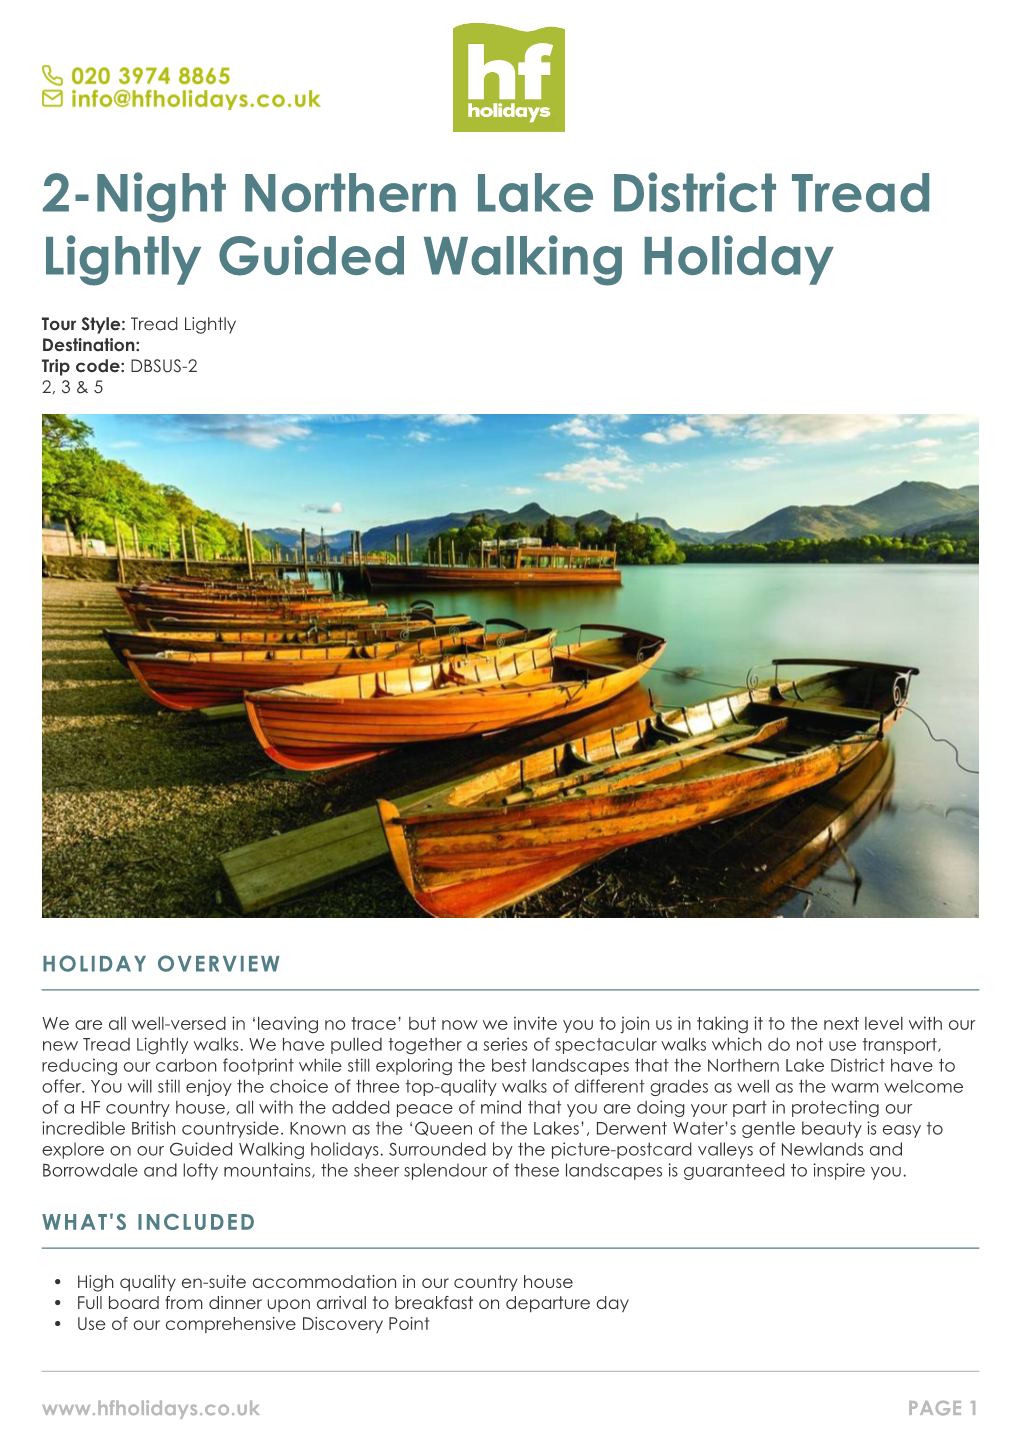 2-Night Northern Lake District Tread Lightly Guided Walking Holiday